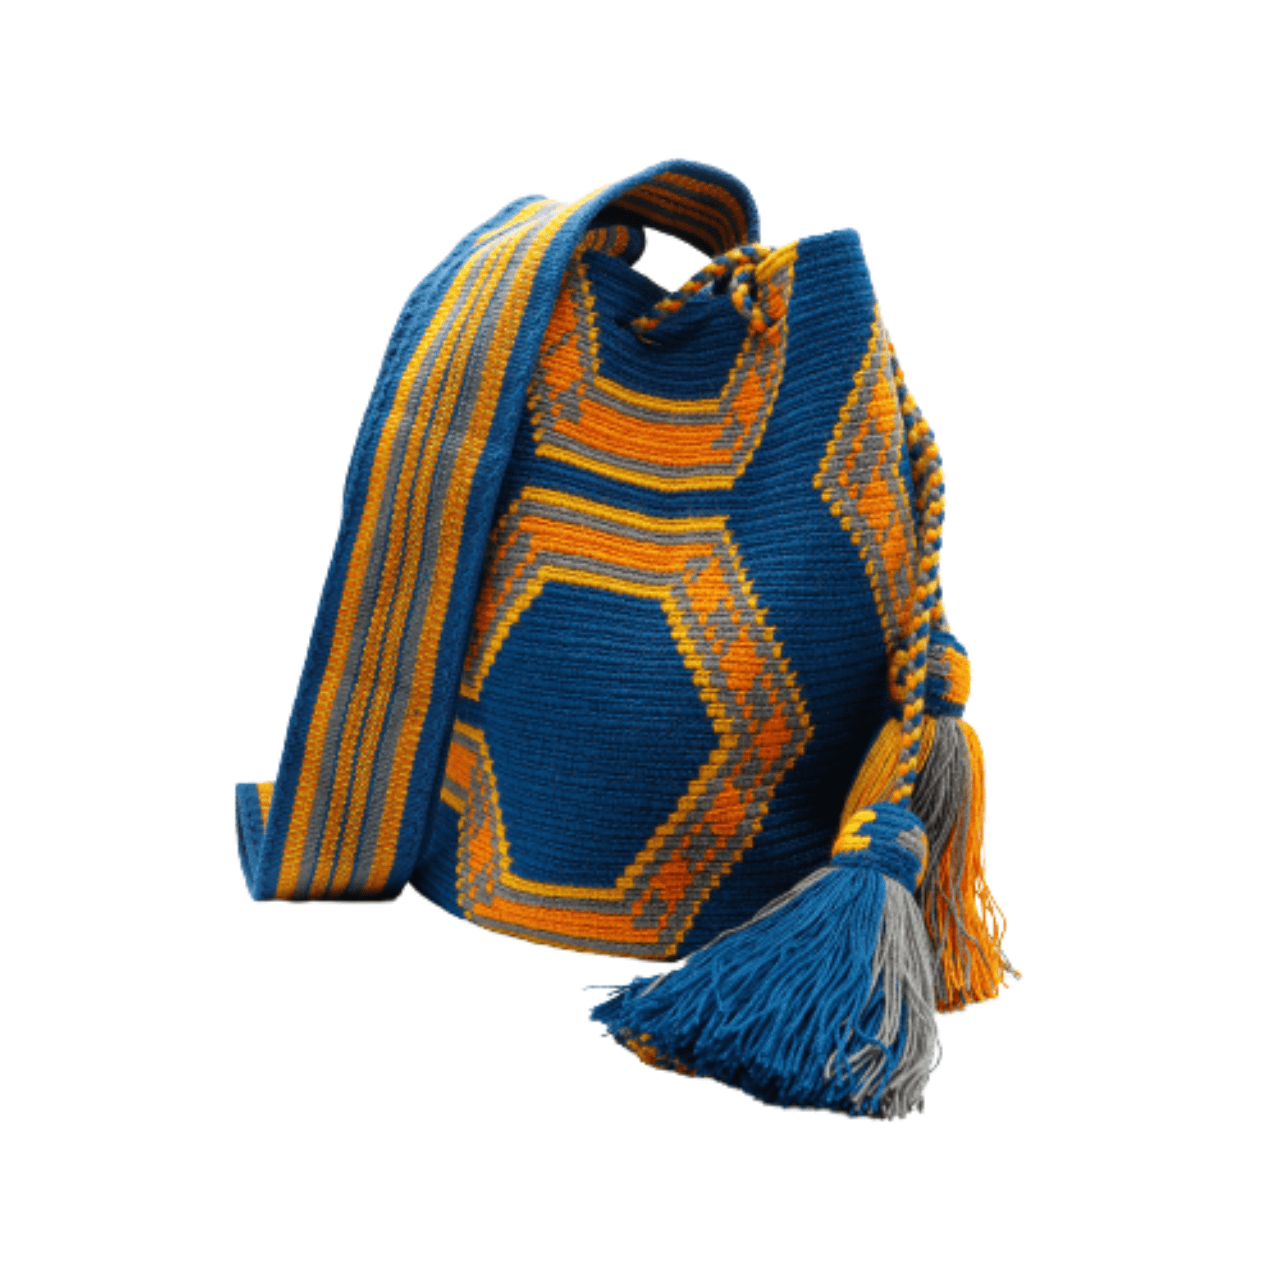 Valeria Wayuu Bag in Blue Ocean with Orange, Gray, and Yellow - Bold and Attractive Design - Handcrafted Beauty and Vibrant Colors